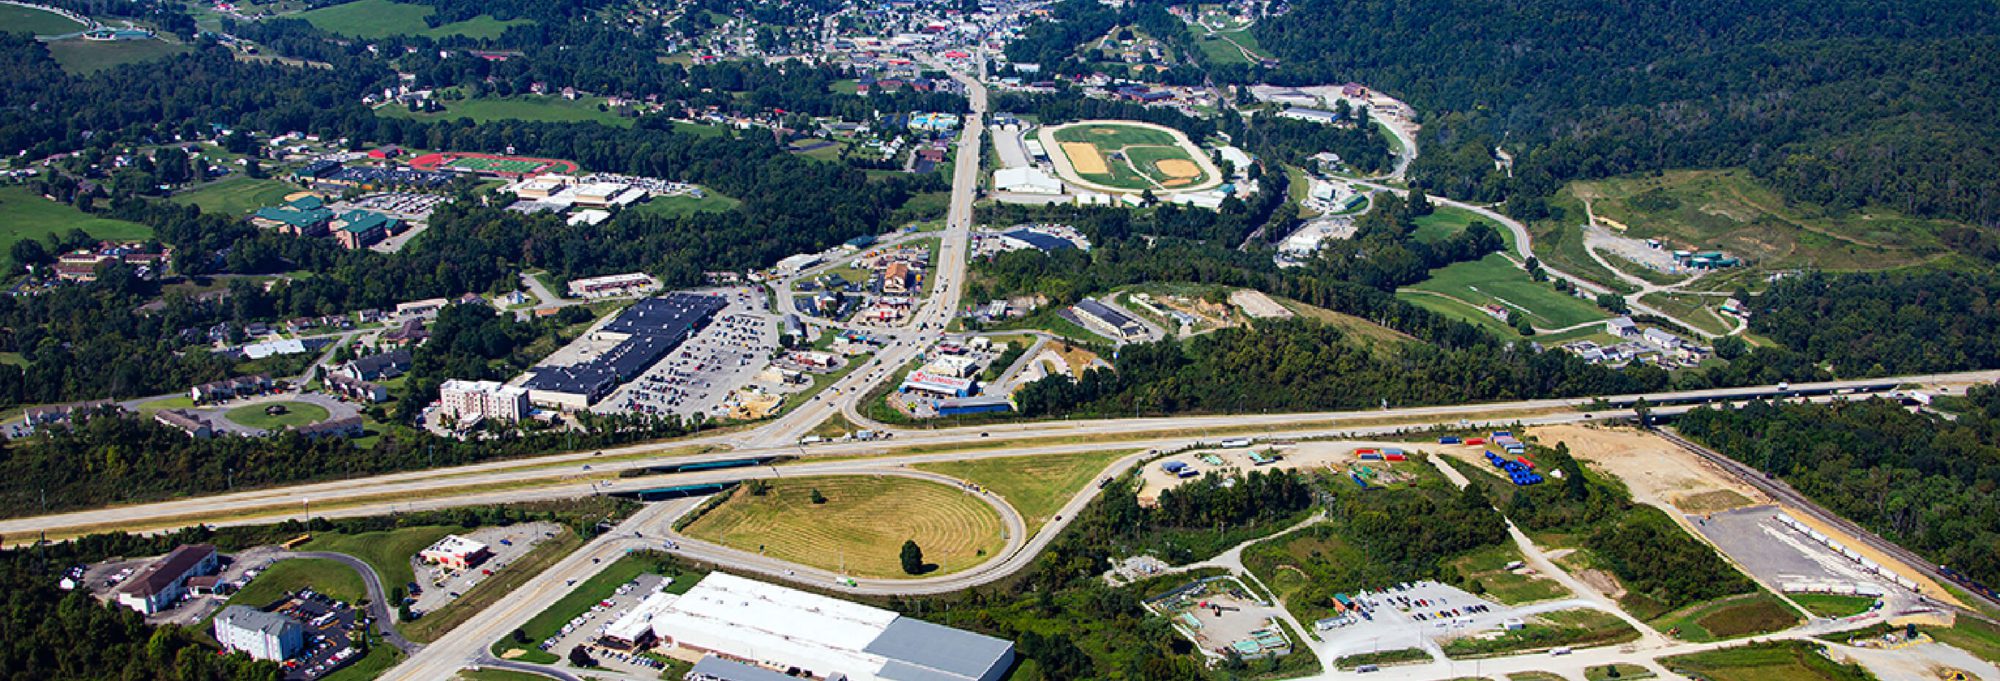 Aerial view of EverGreene Technology Park